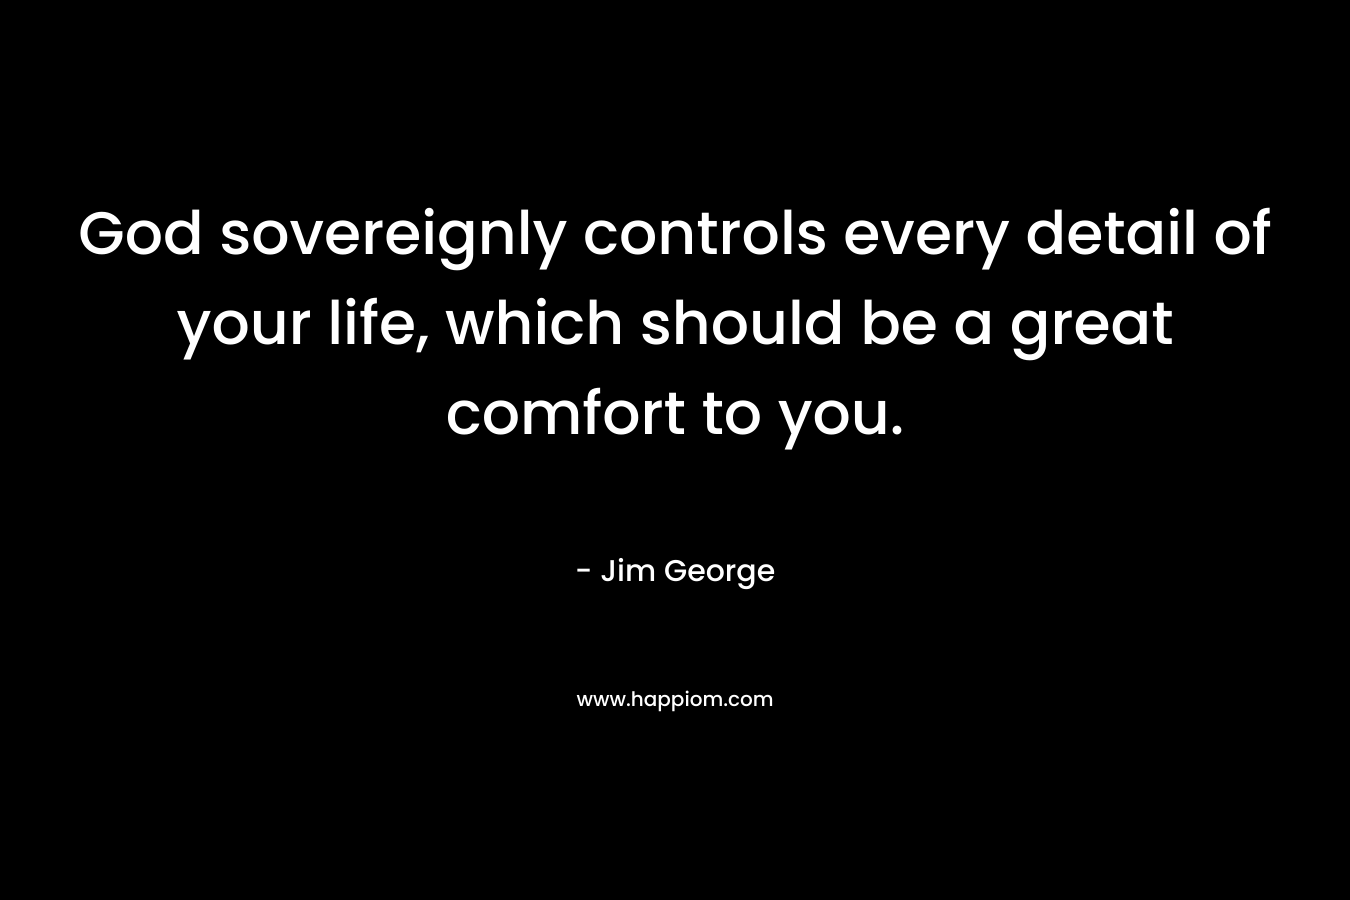 God sovereignly controls every detail of your life, which should be a great comfort to you. – Jim George